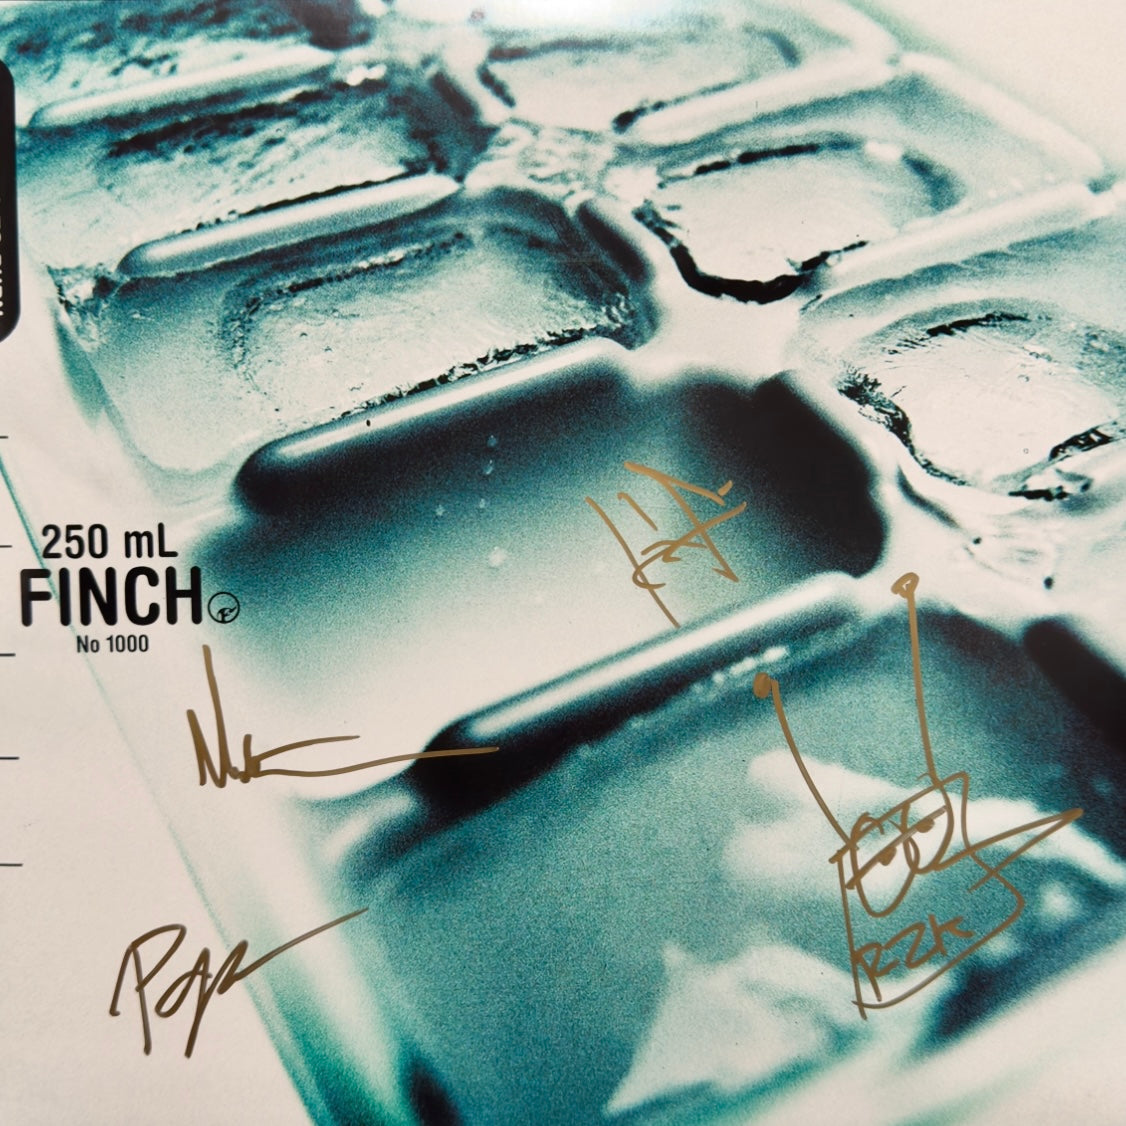 Finch - What It Is To Burn - signed record